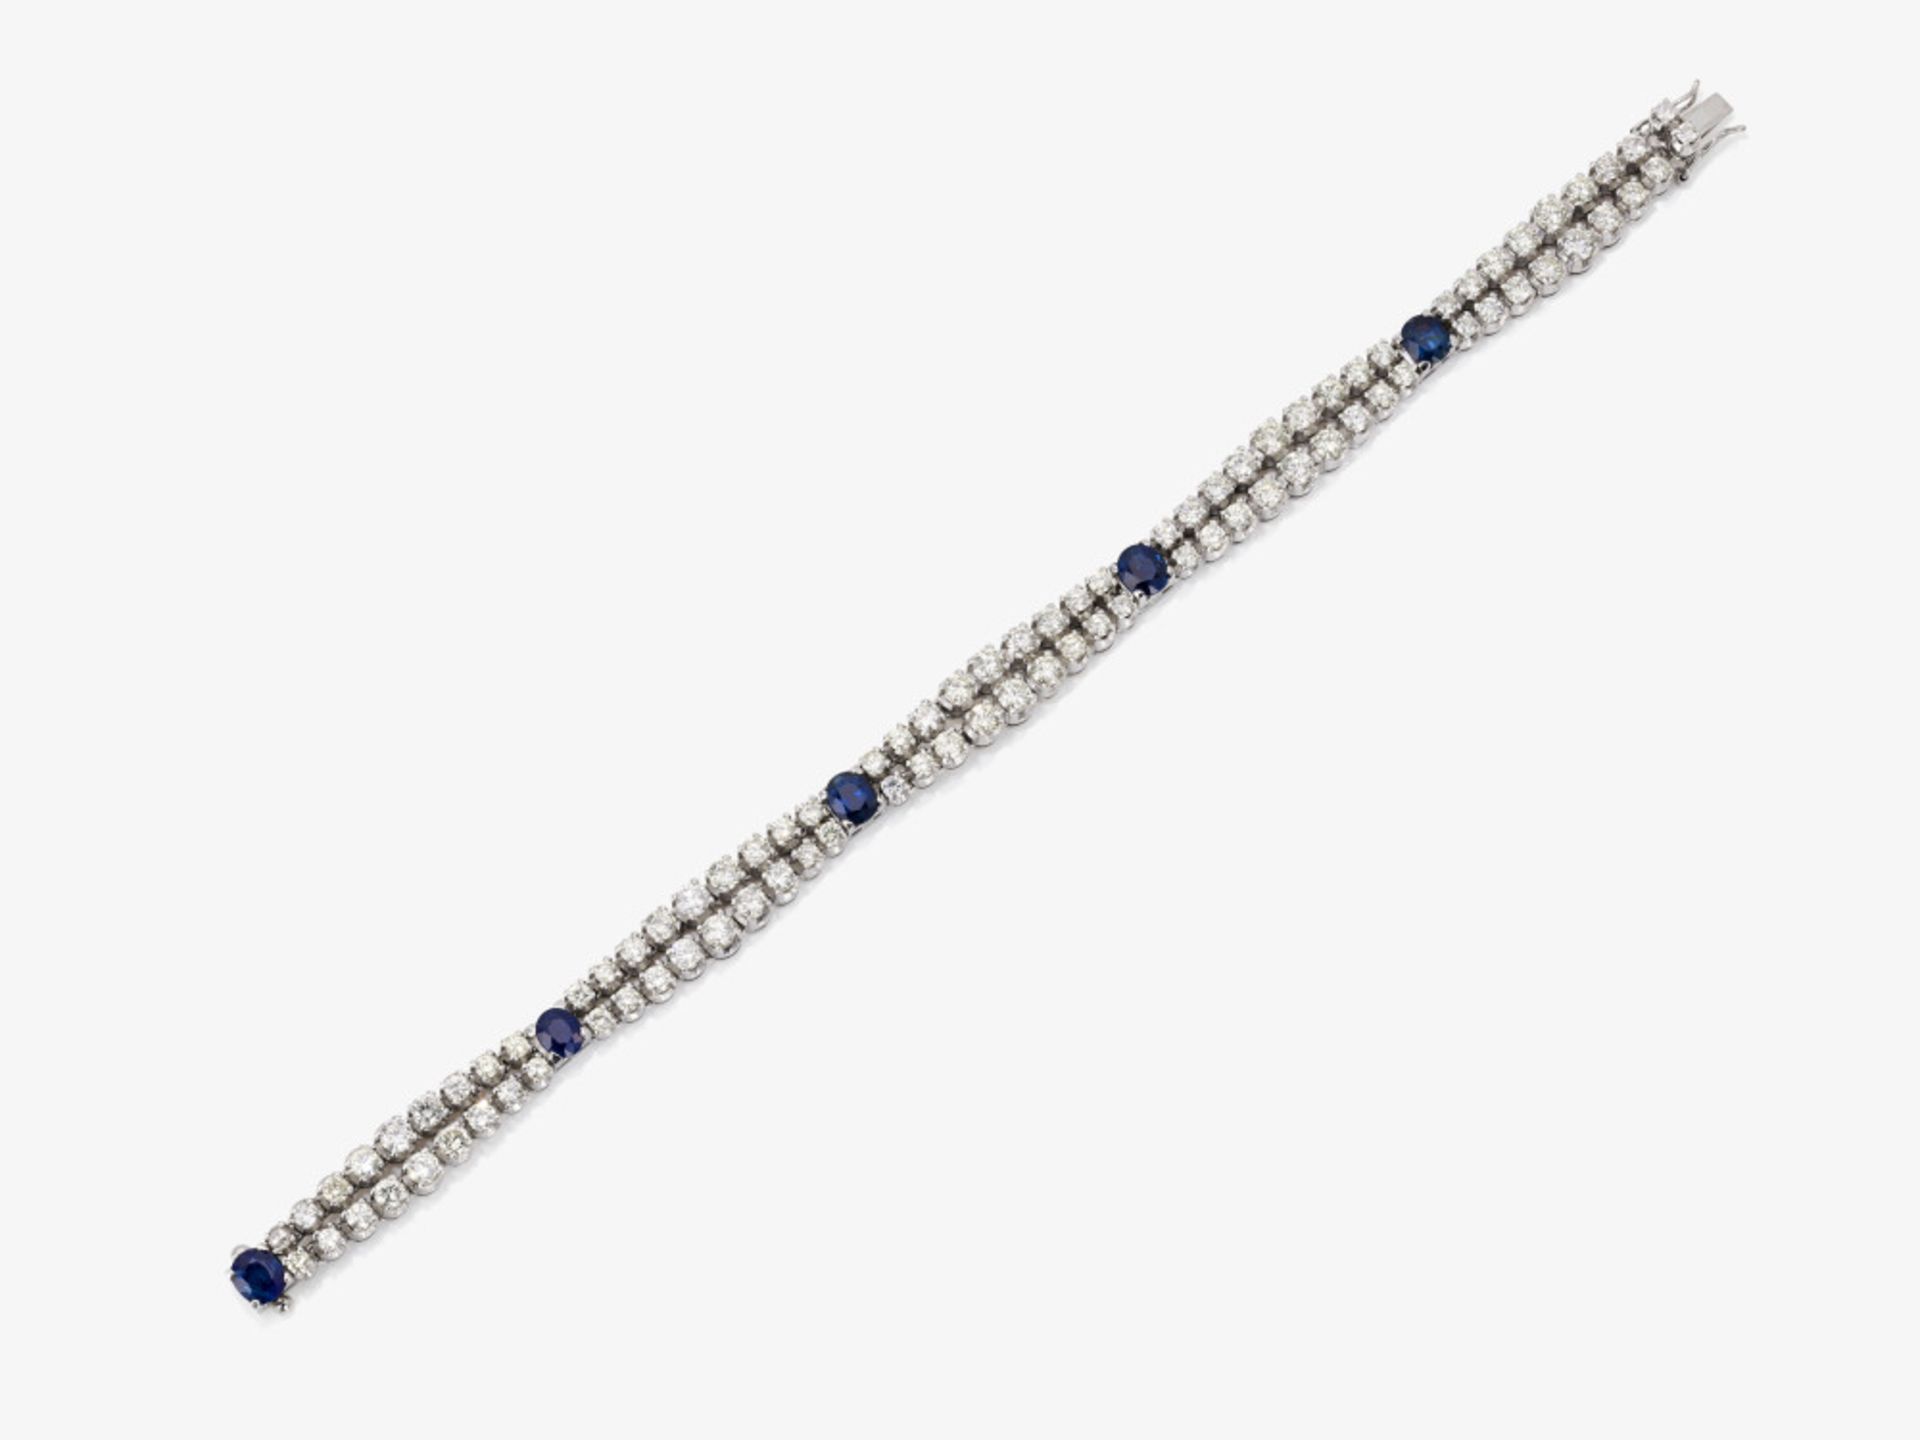 A bracelet with brilliant-cut diamonds and sapphires - Image 2 of 2